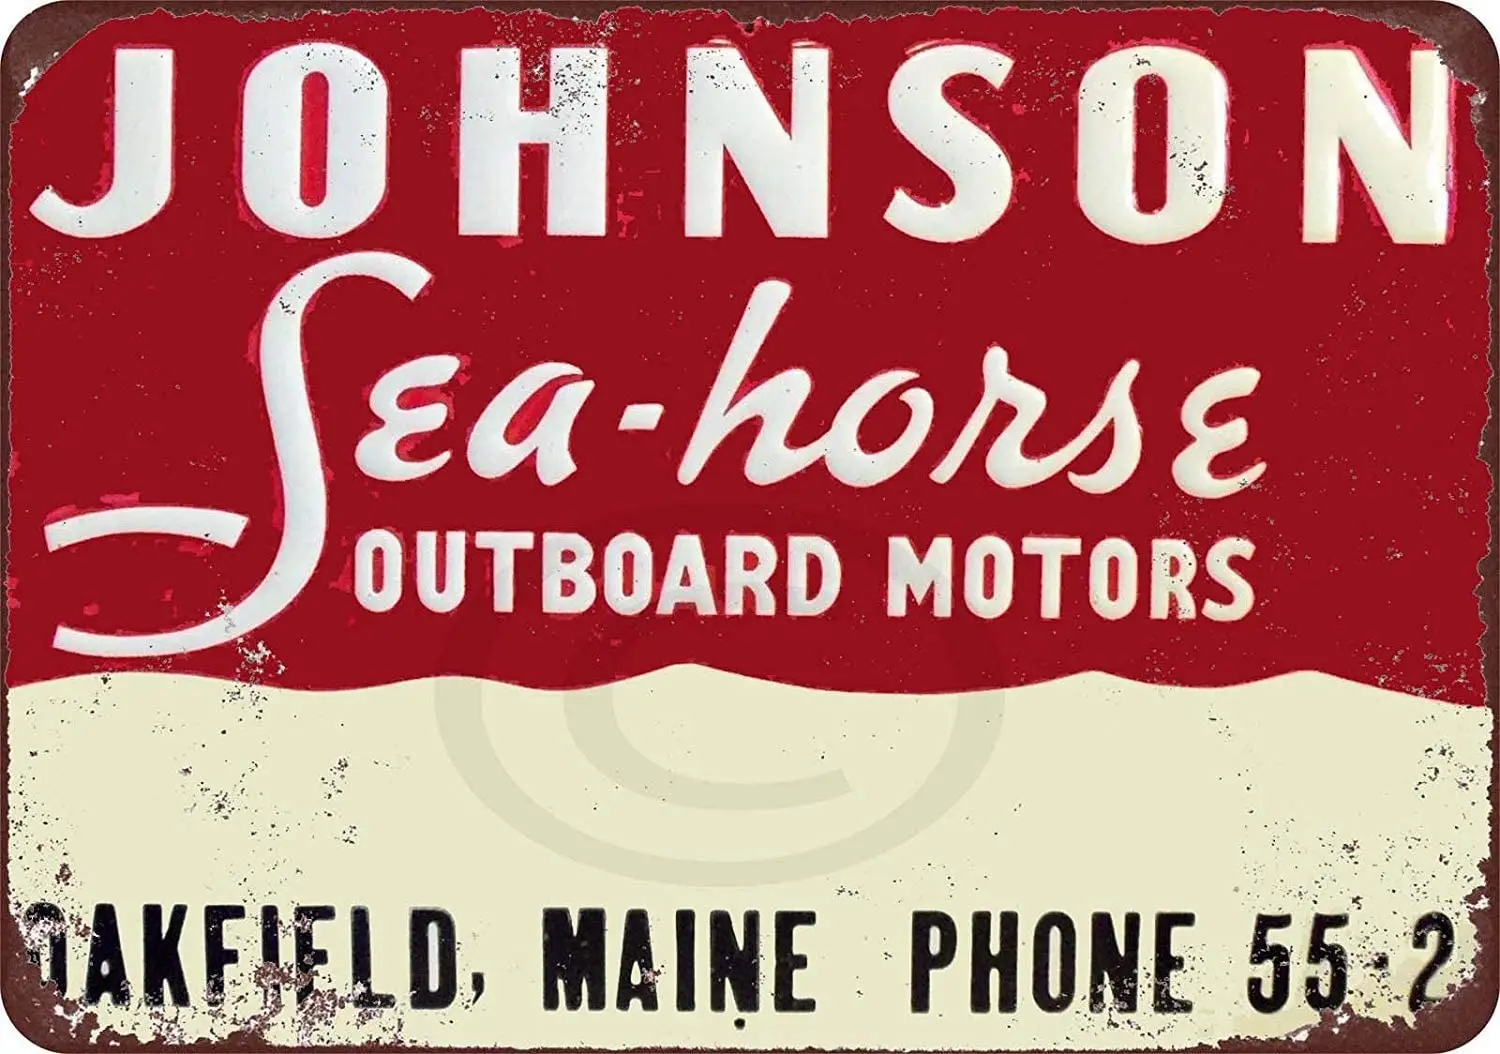 

Jesiceny New Tin Sign Johnson Sea-Horse Outboard Motors Vintage Aluminum Metal Sign 8x12 Inches